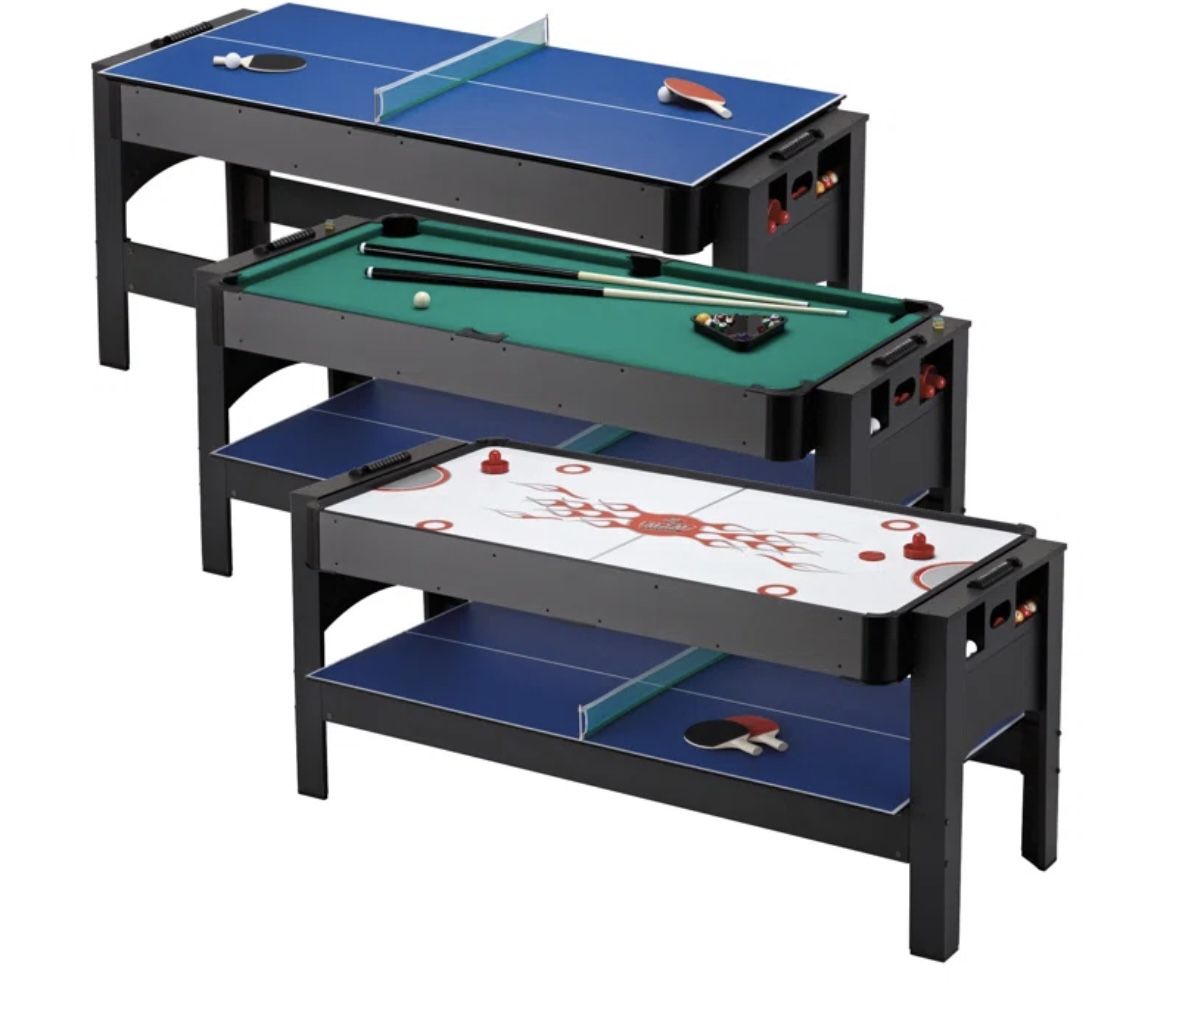 Fat Cat 3-in-1, 6 Foot Game Table